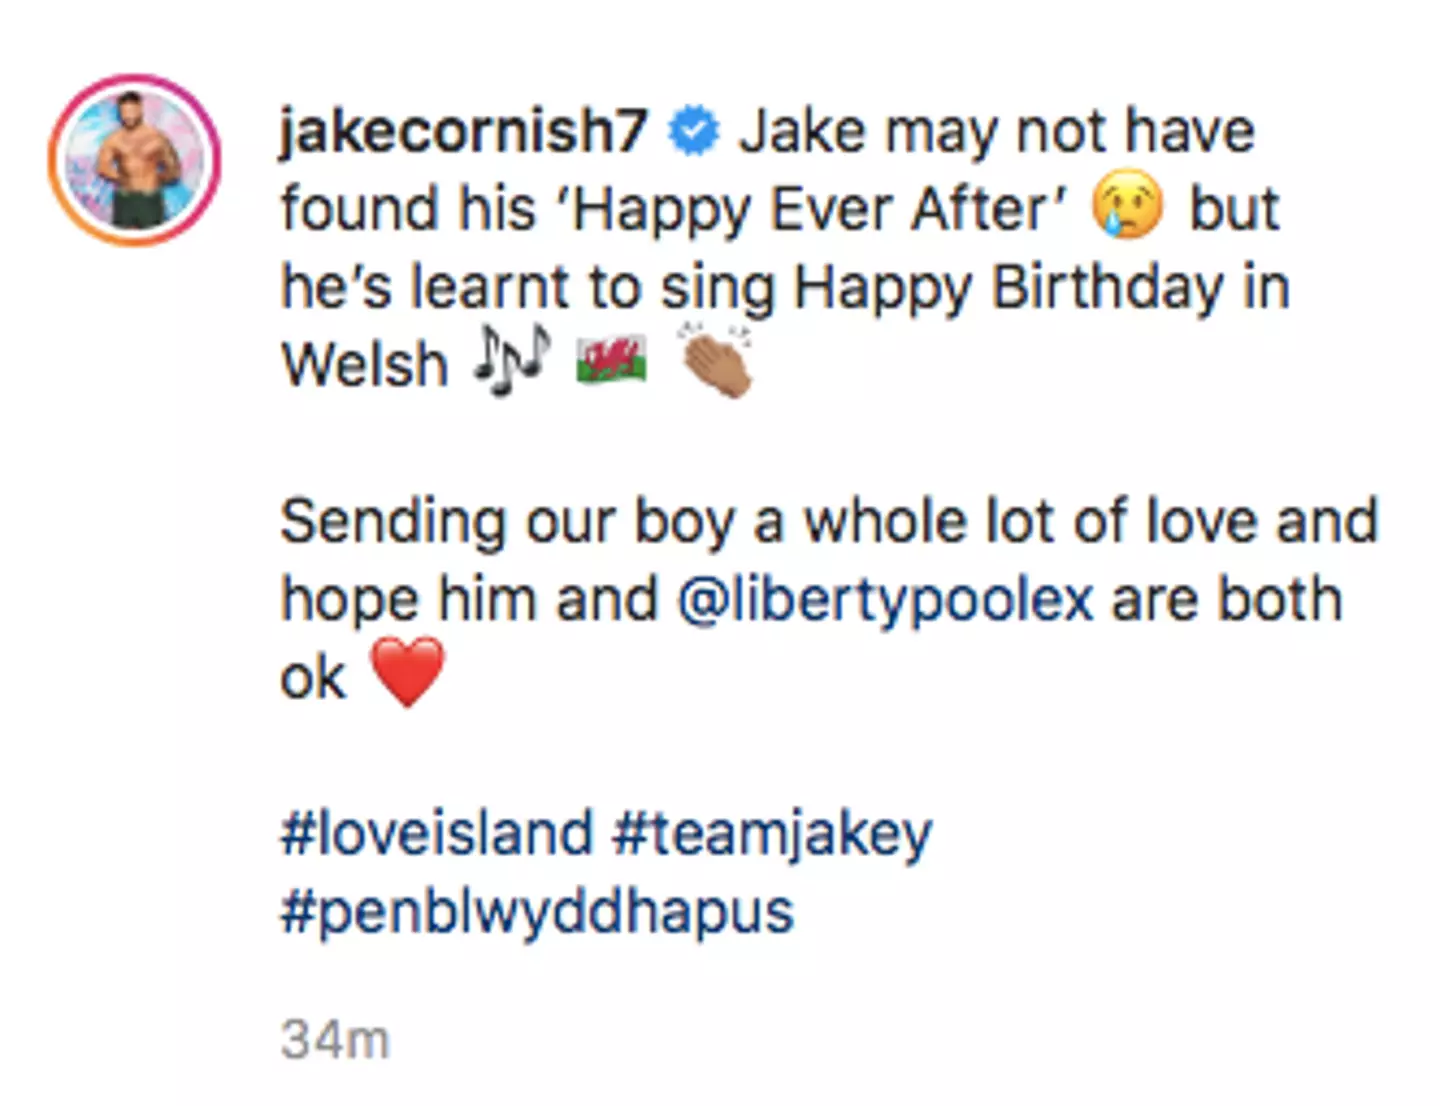 Jake's Instagram sends its love to Unity (